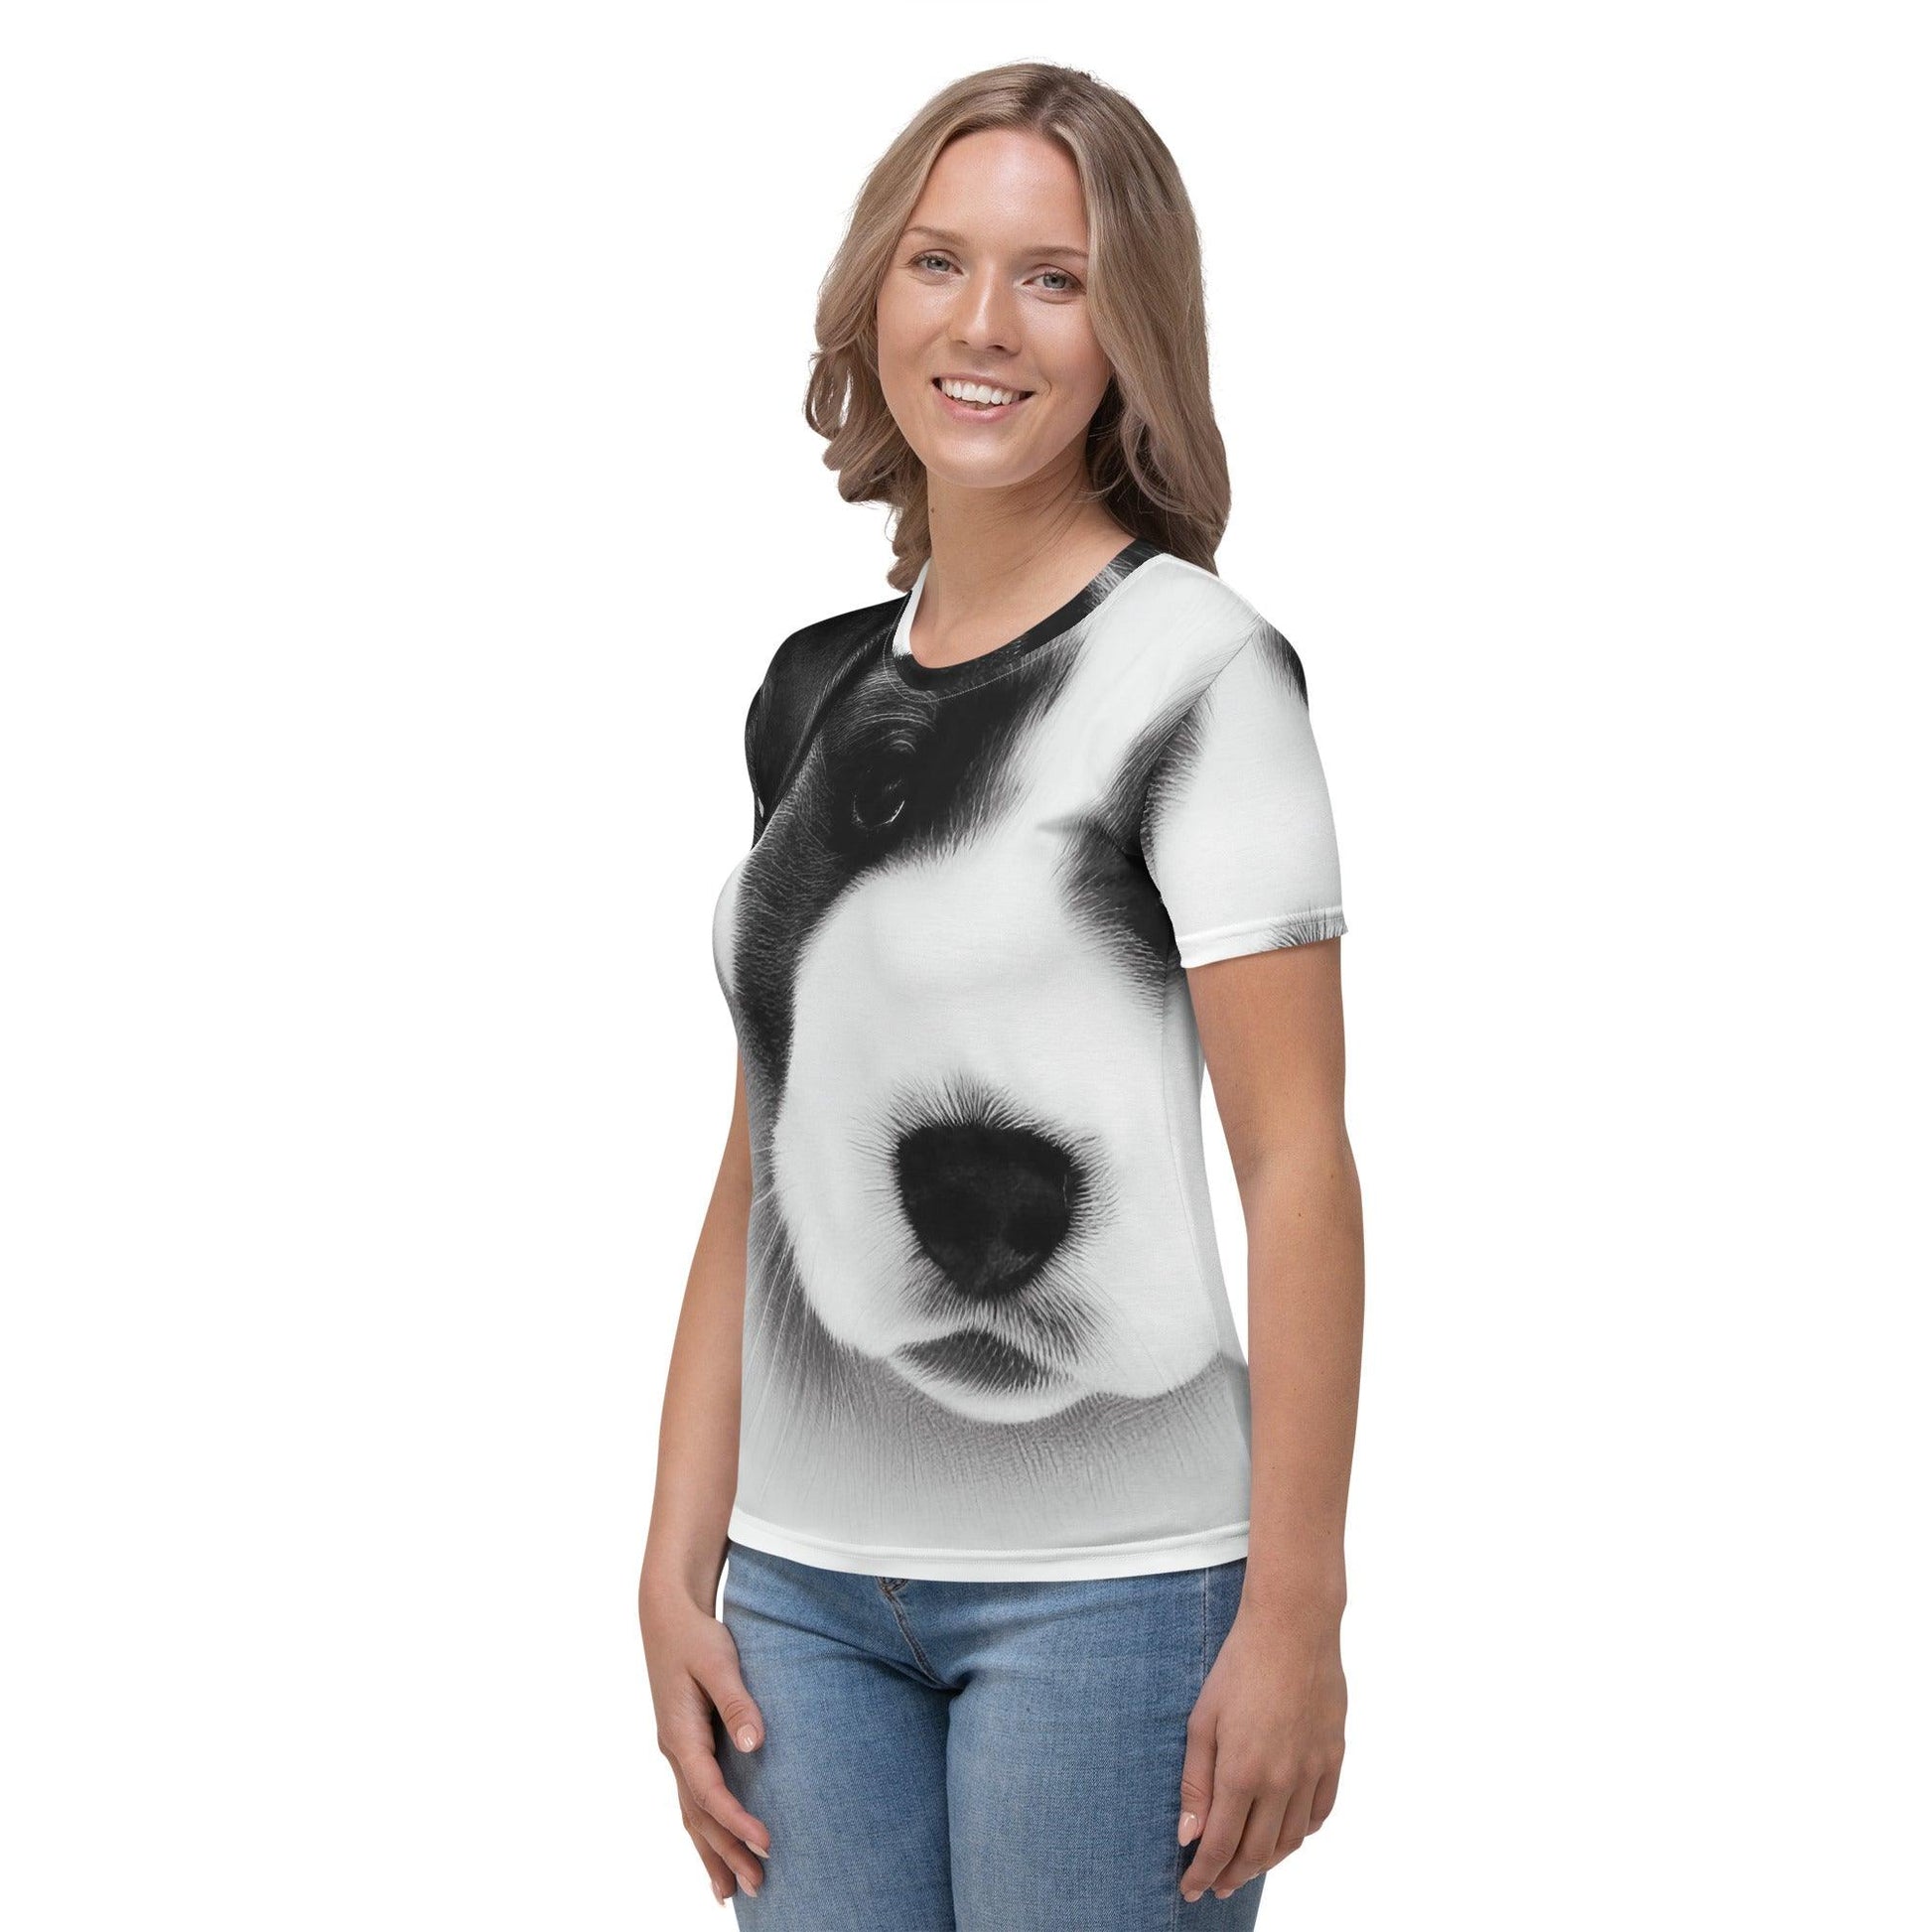 Puppy Love 5 - Womens T-Shirt - iSAW Company